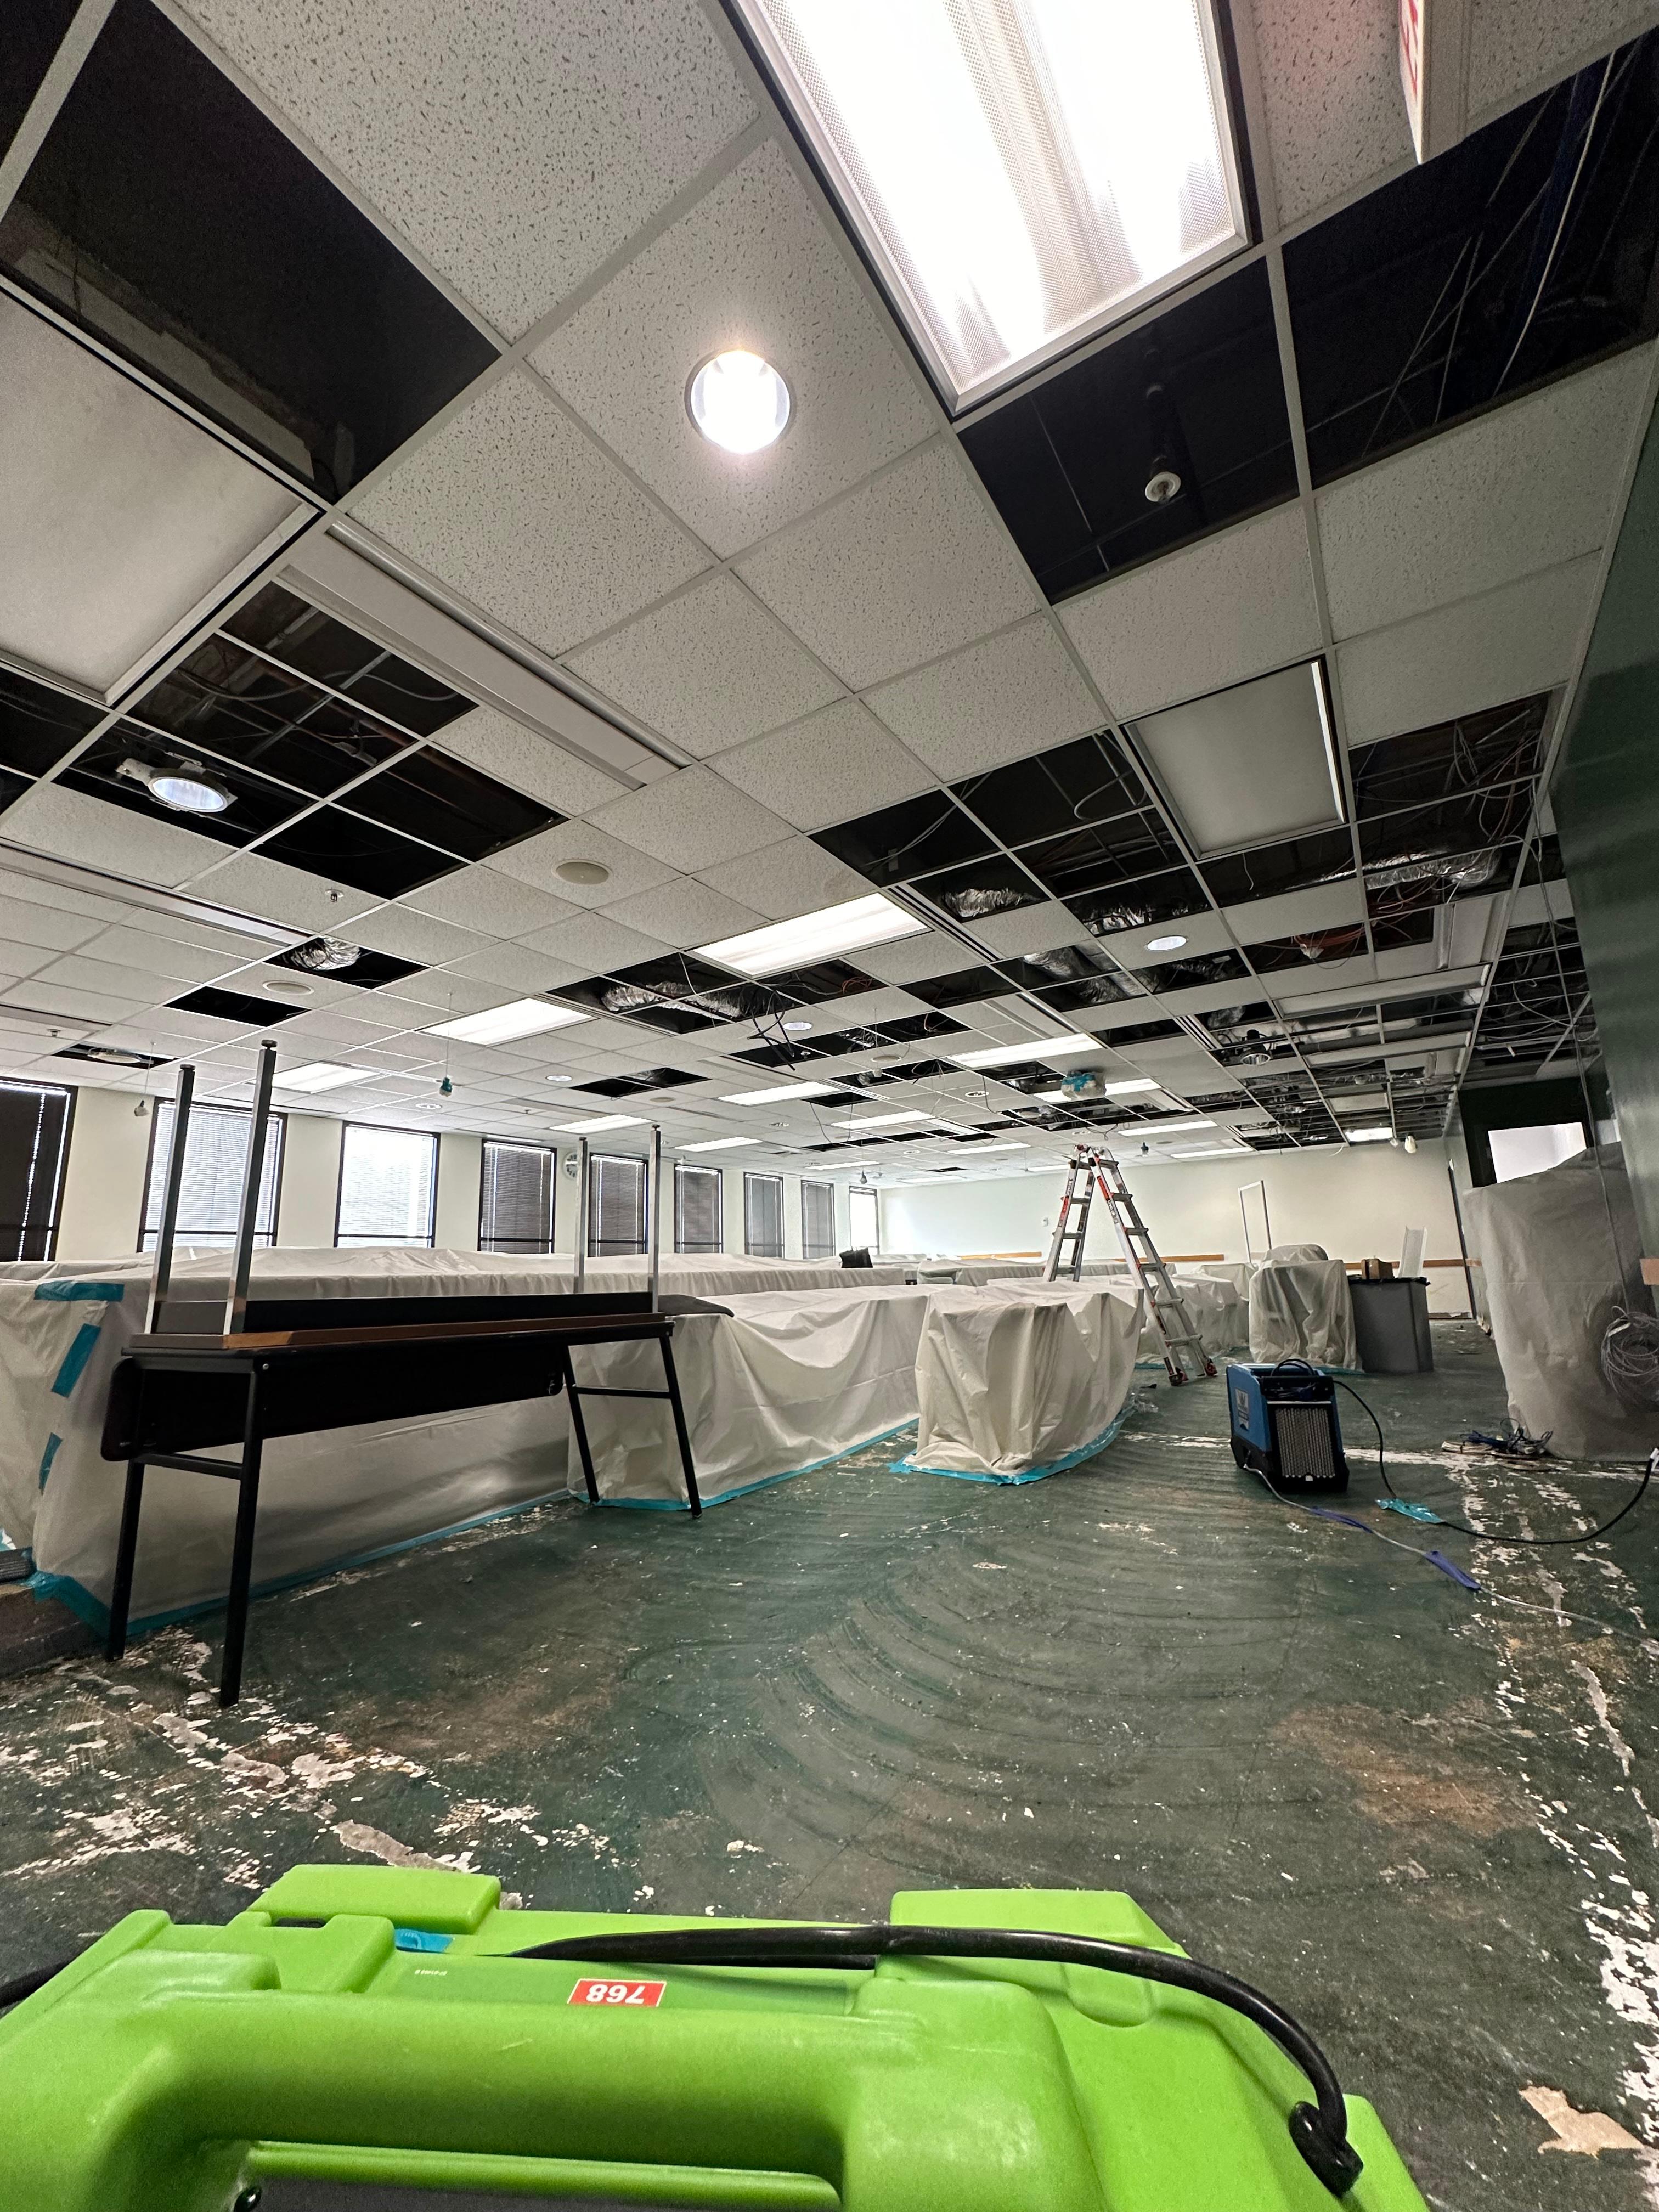 The SERVPRO team had to remove all of the flooring, drywall and ceiling tiles due to a water leave on the floor above.